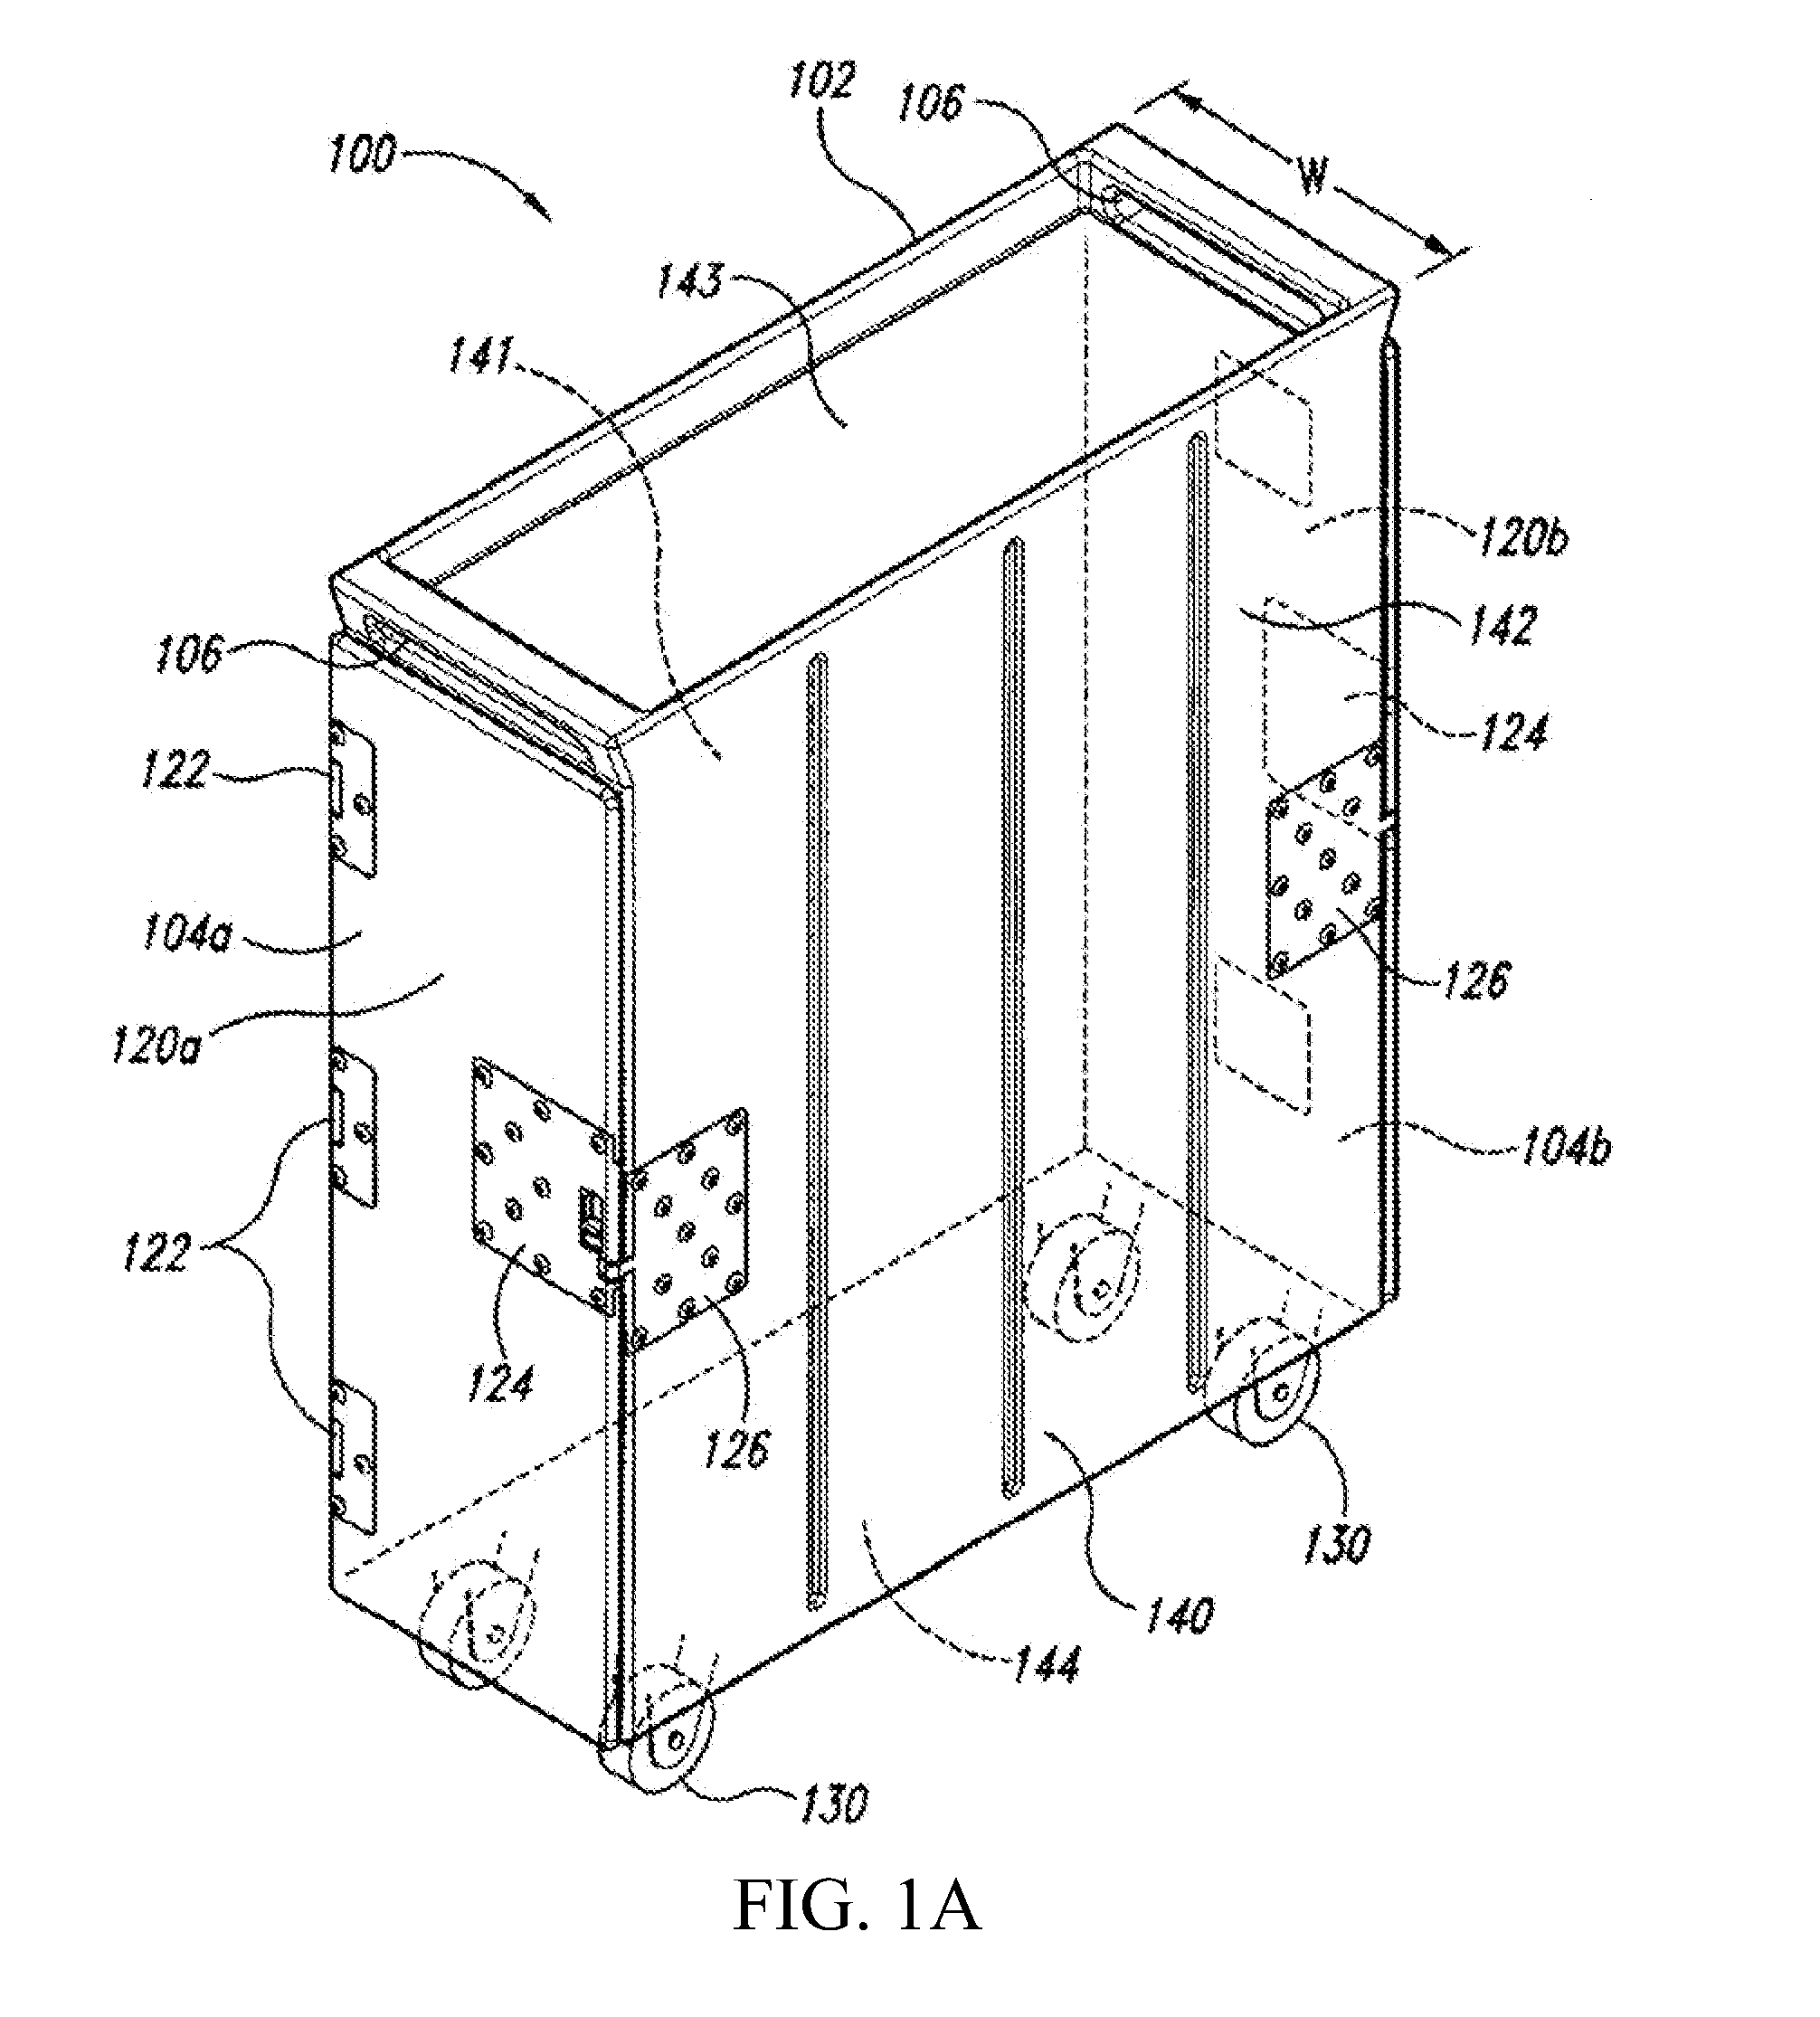 Vertically mounted dry ice cooling compartment applied to a galley cart for temperature gradient reduction